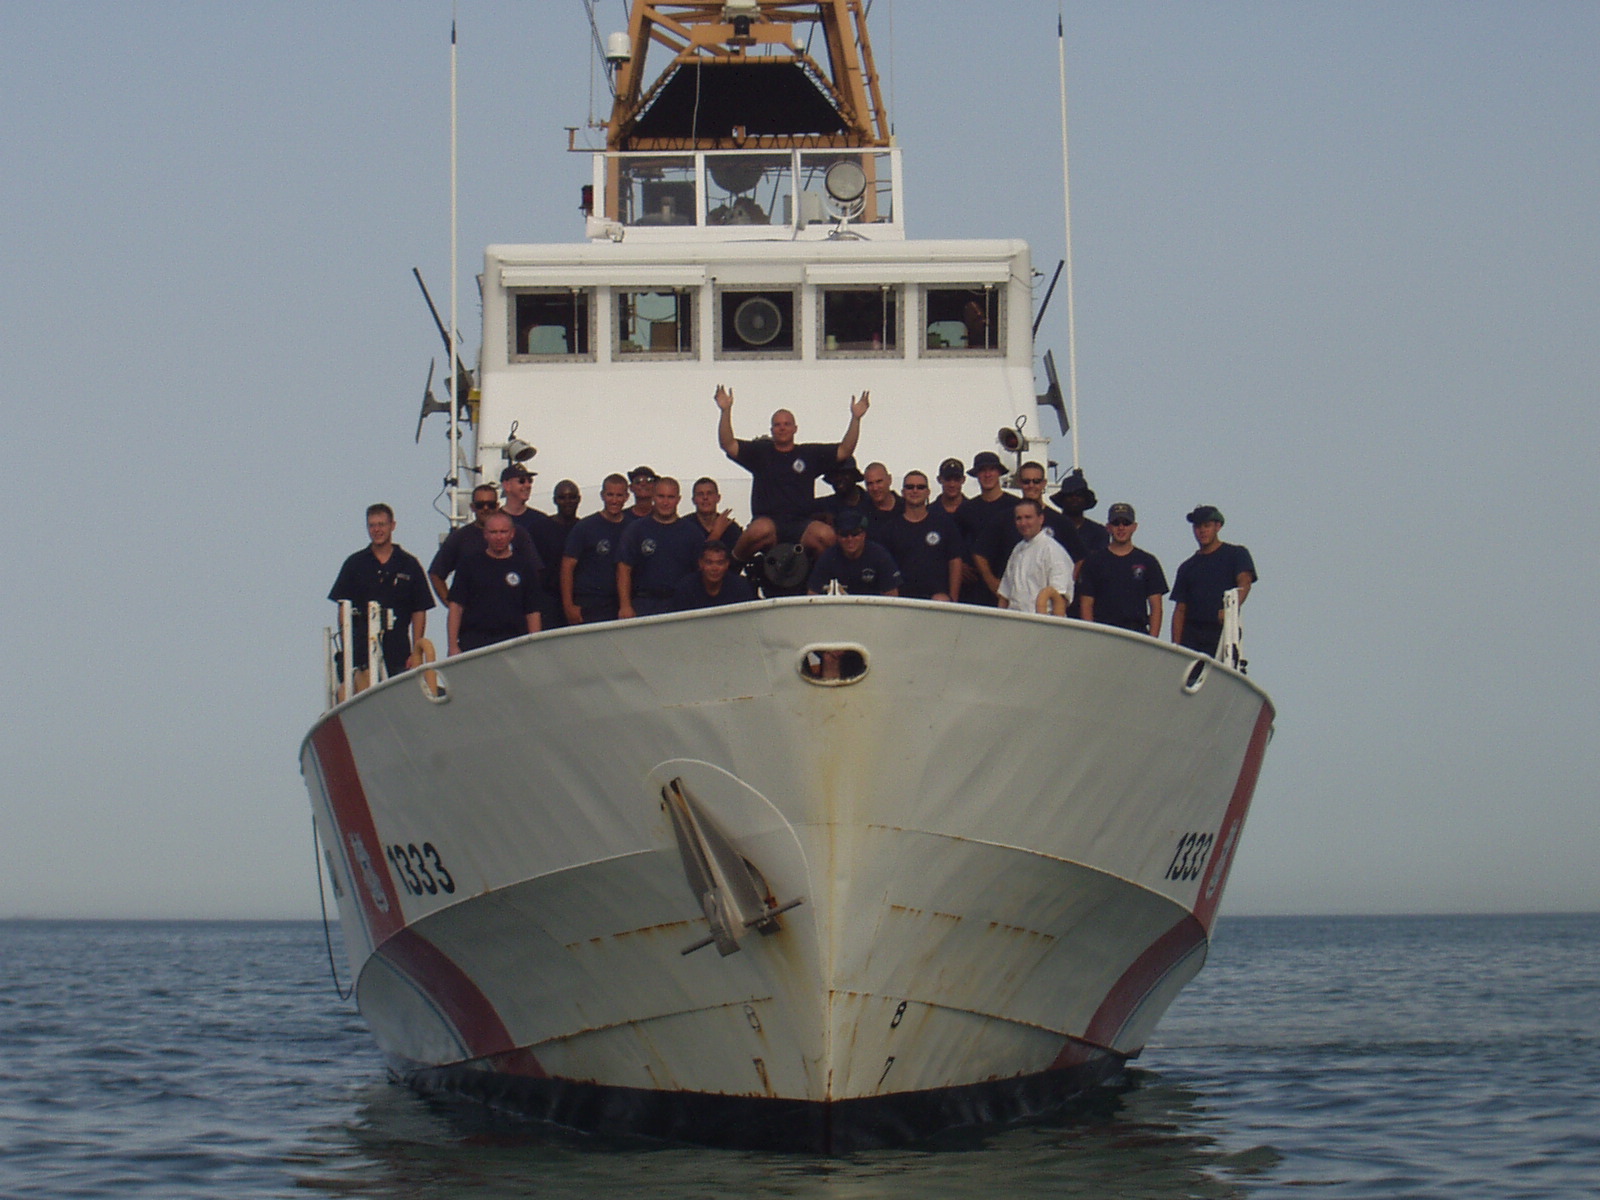 5.	Crew of the Coast Guard Cutter Adak grouped on the bow of the 110-foot cutter. (Courtesy of U.S. Coast Guard)